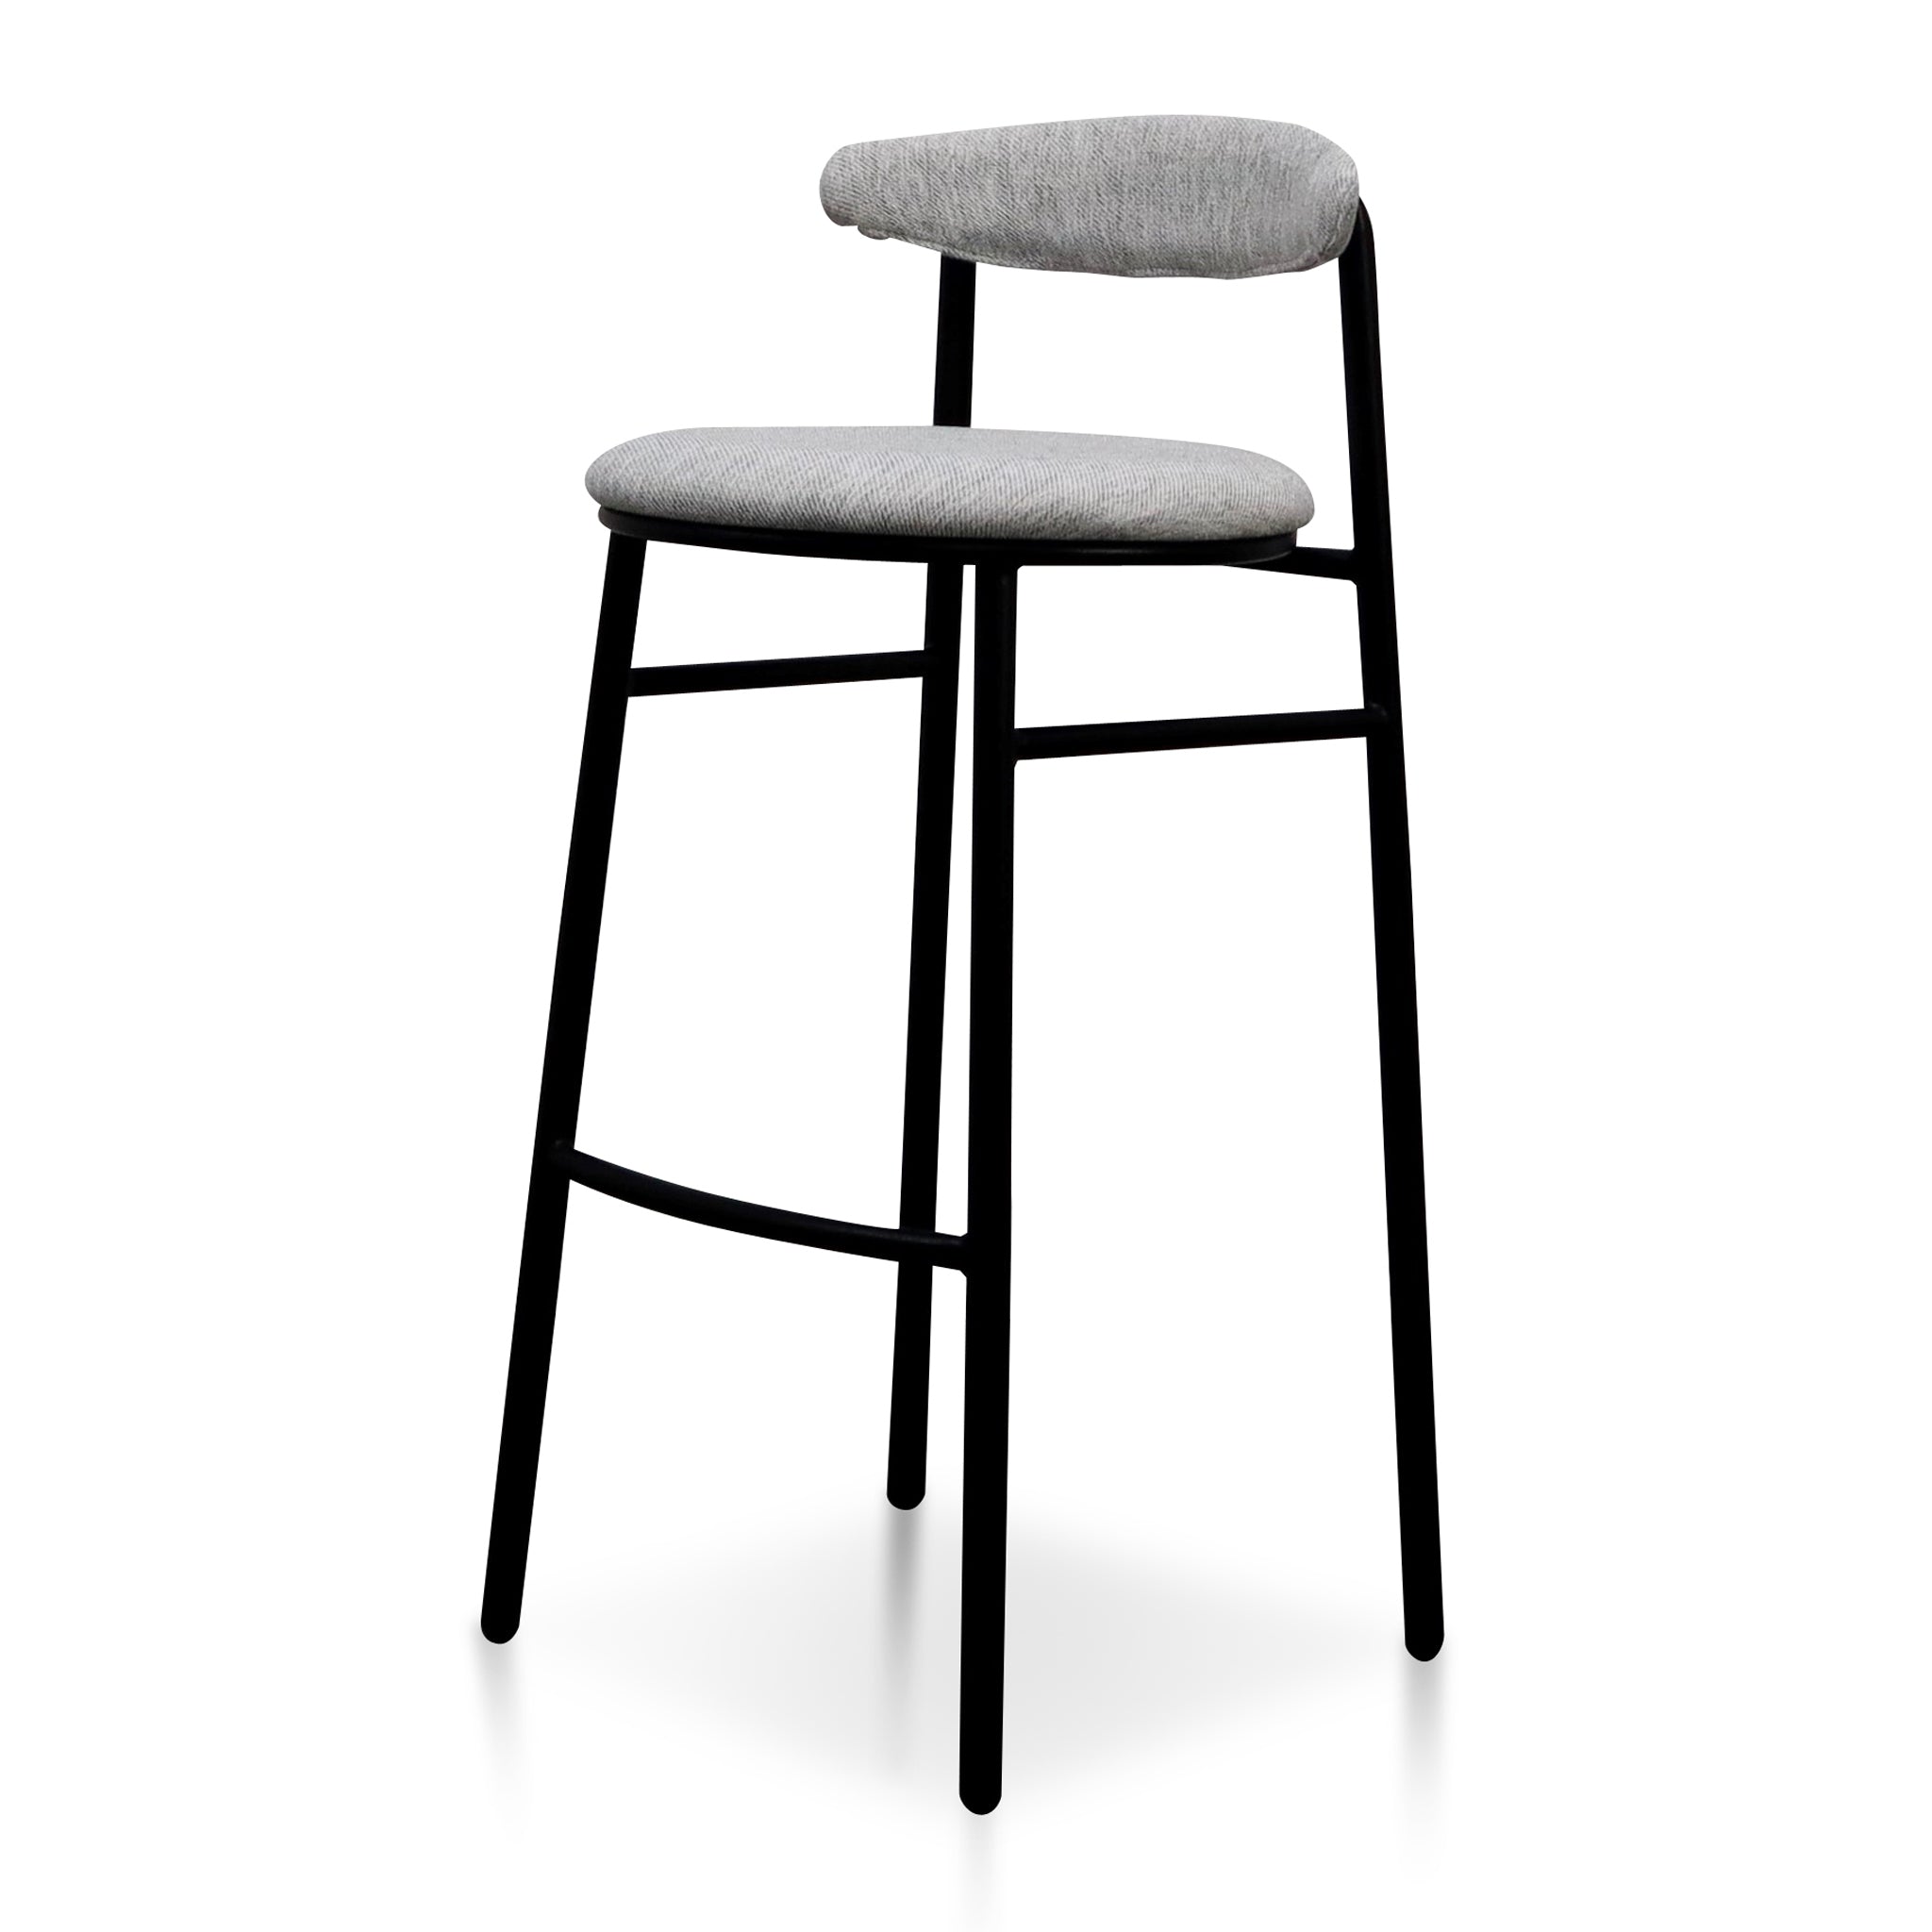 Oneal 65cm Fabric Bar Stool - Silver Grey and Black Legs (Set of 2)